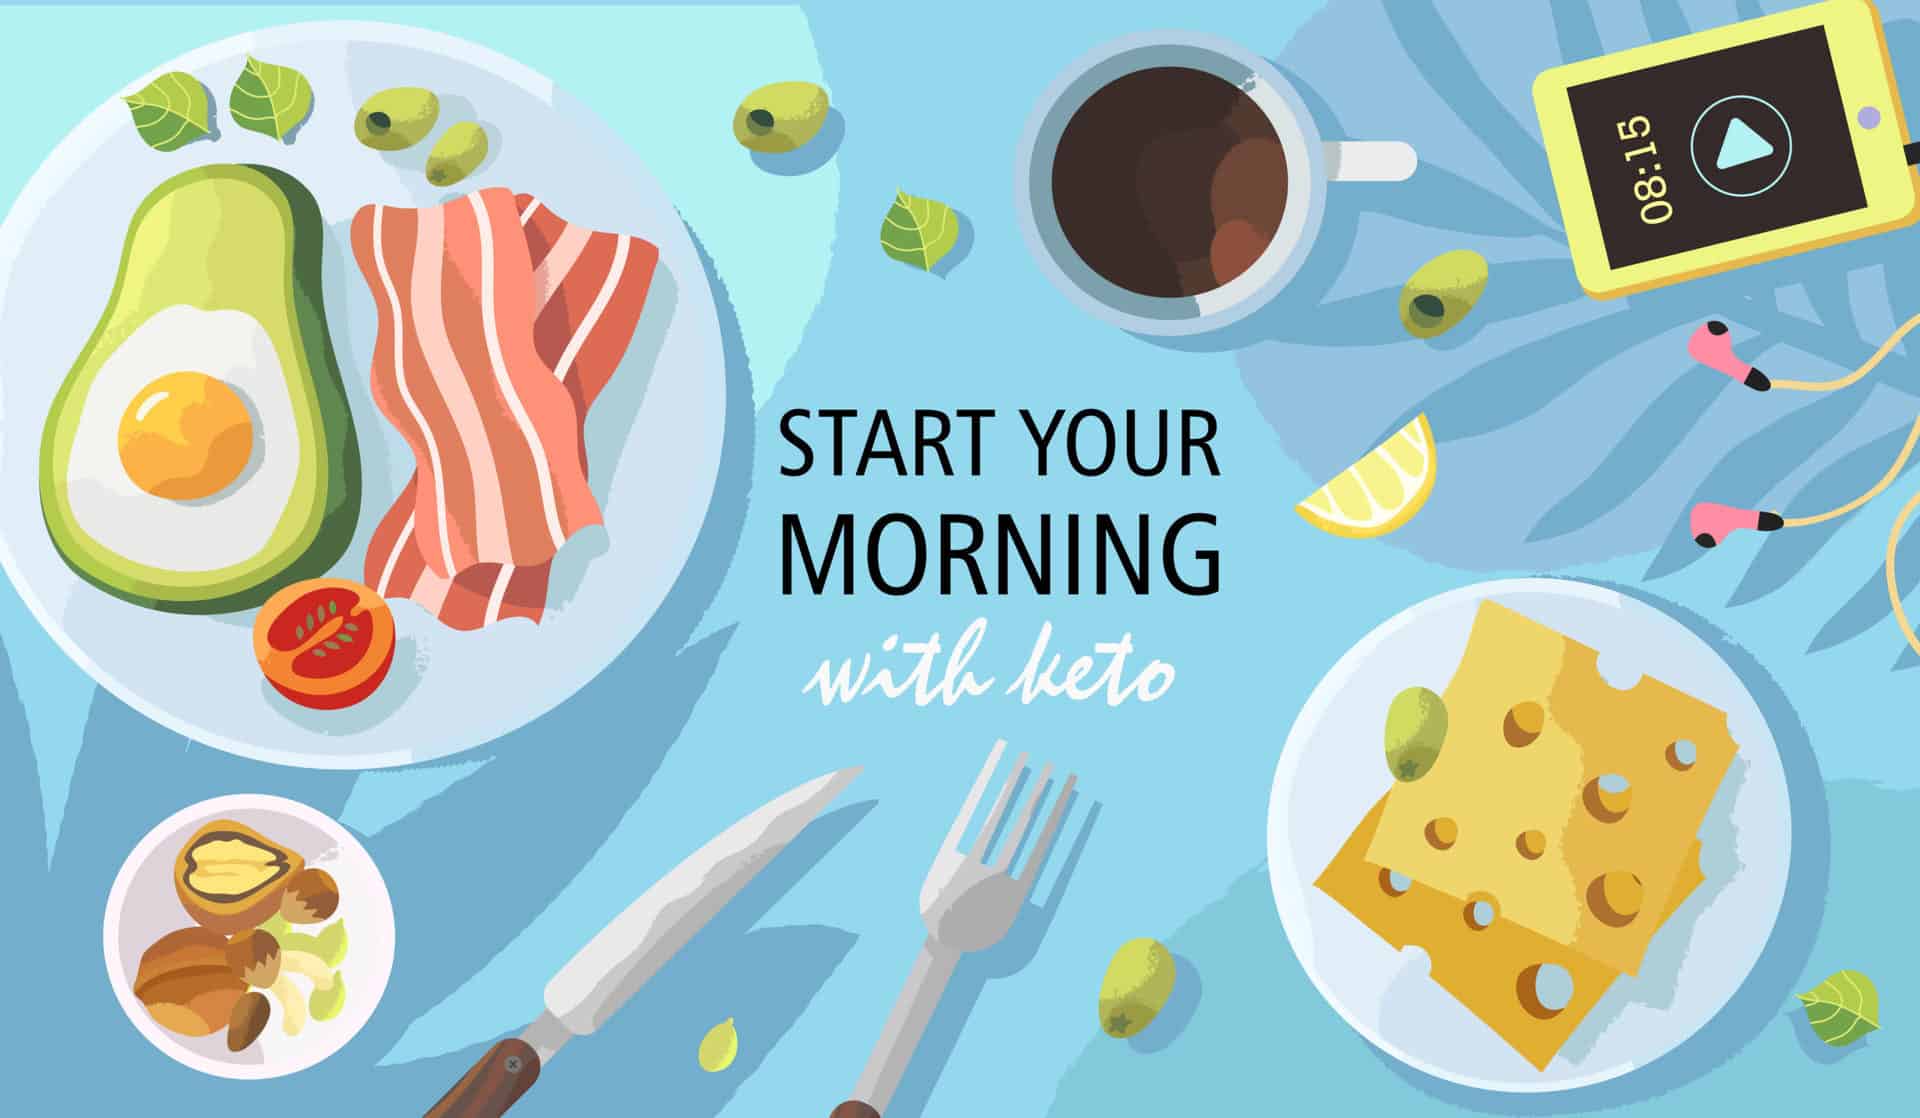 How to Make the Ketogenic Diet Work for You